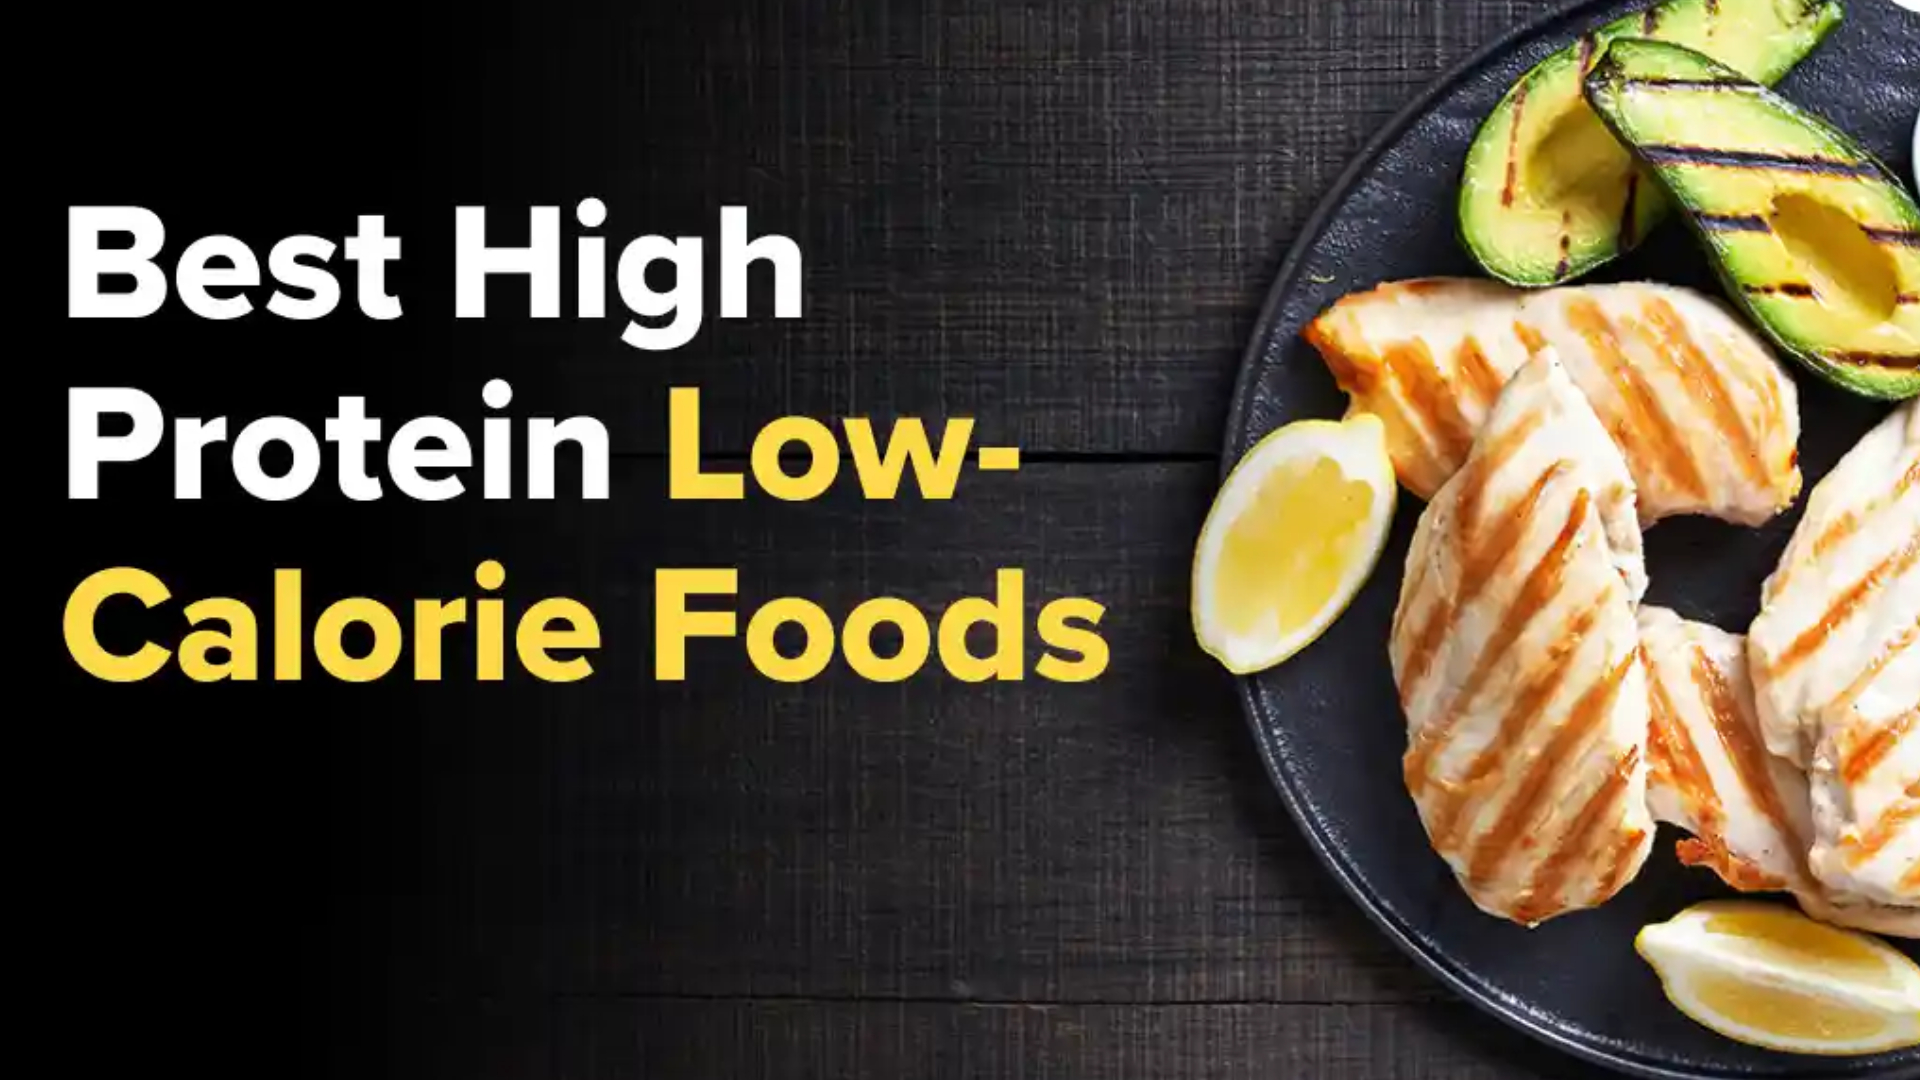 10 Best High-Protein, Low-Calorie Foods for Weight Loss image